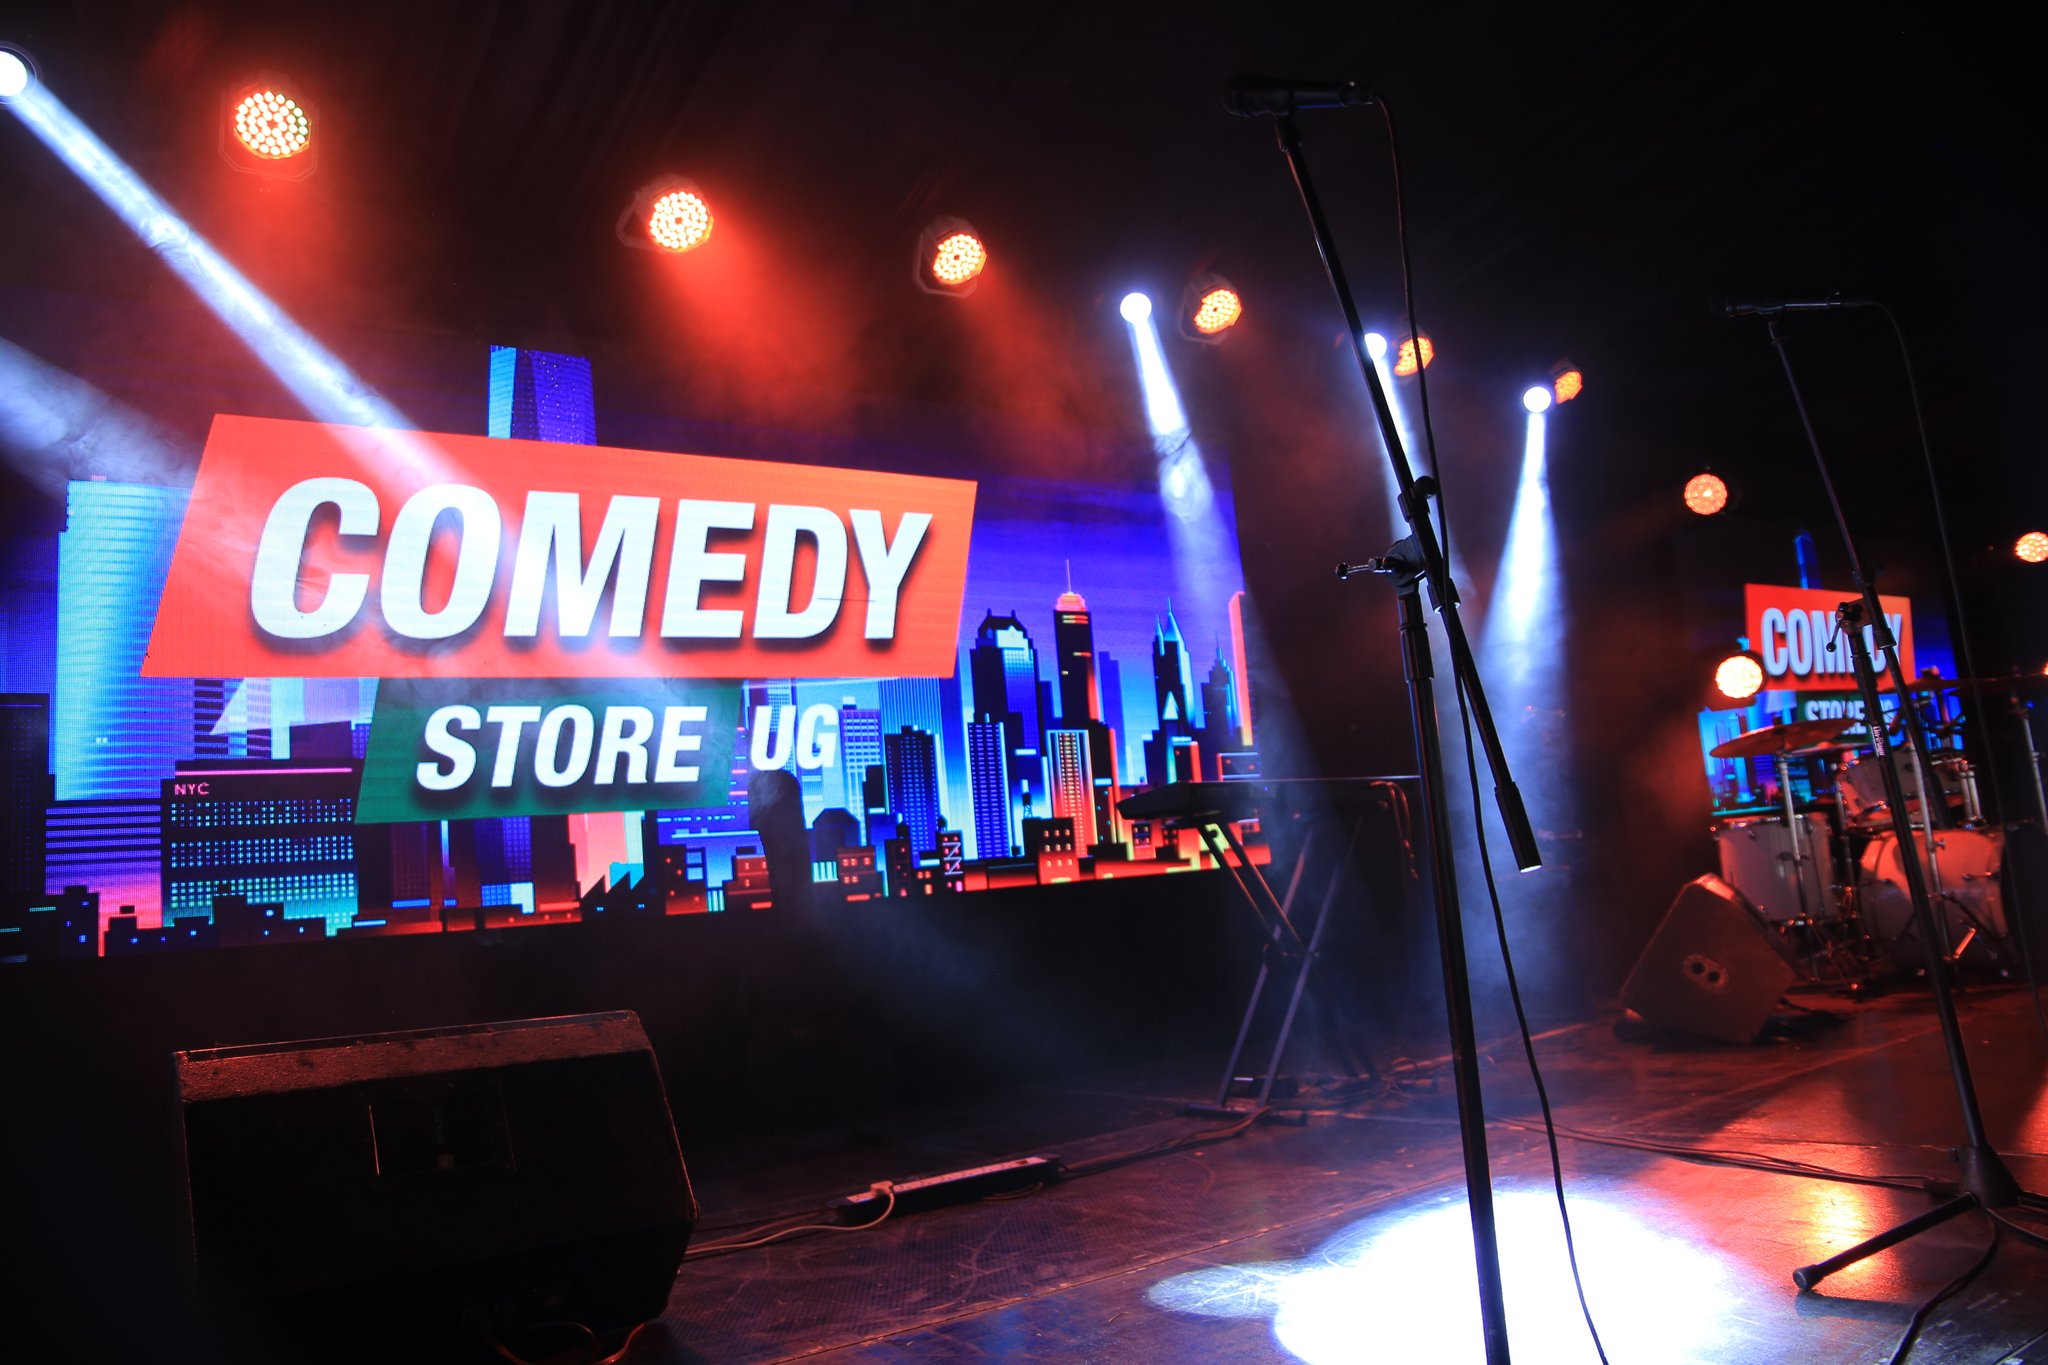 Comedy Store moves back to its former home in Lugogo